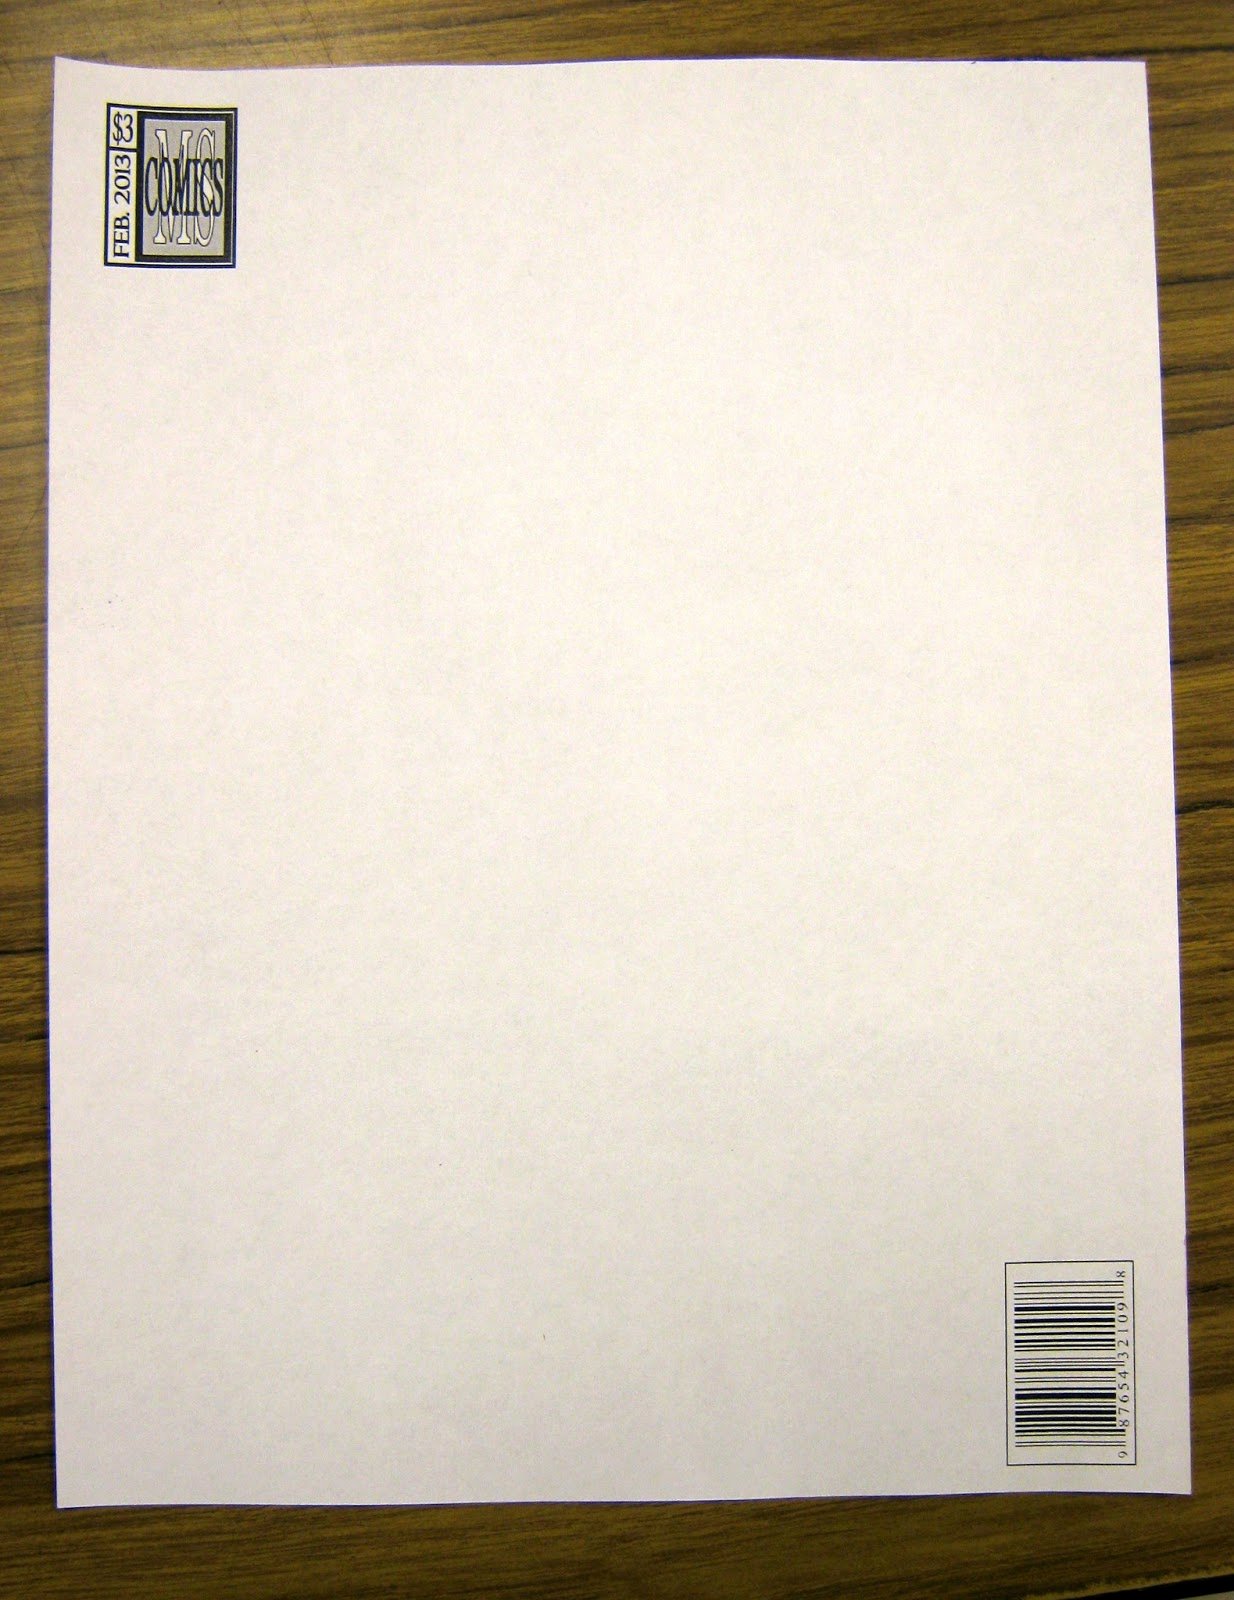 5 Best Of Blank Ic Book Cover Blank Ic Book